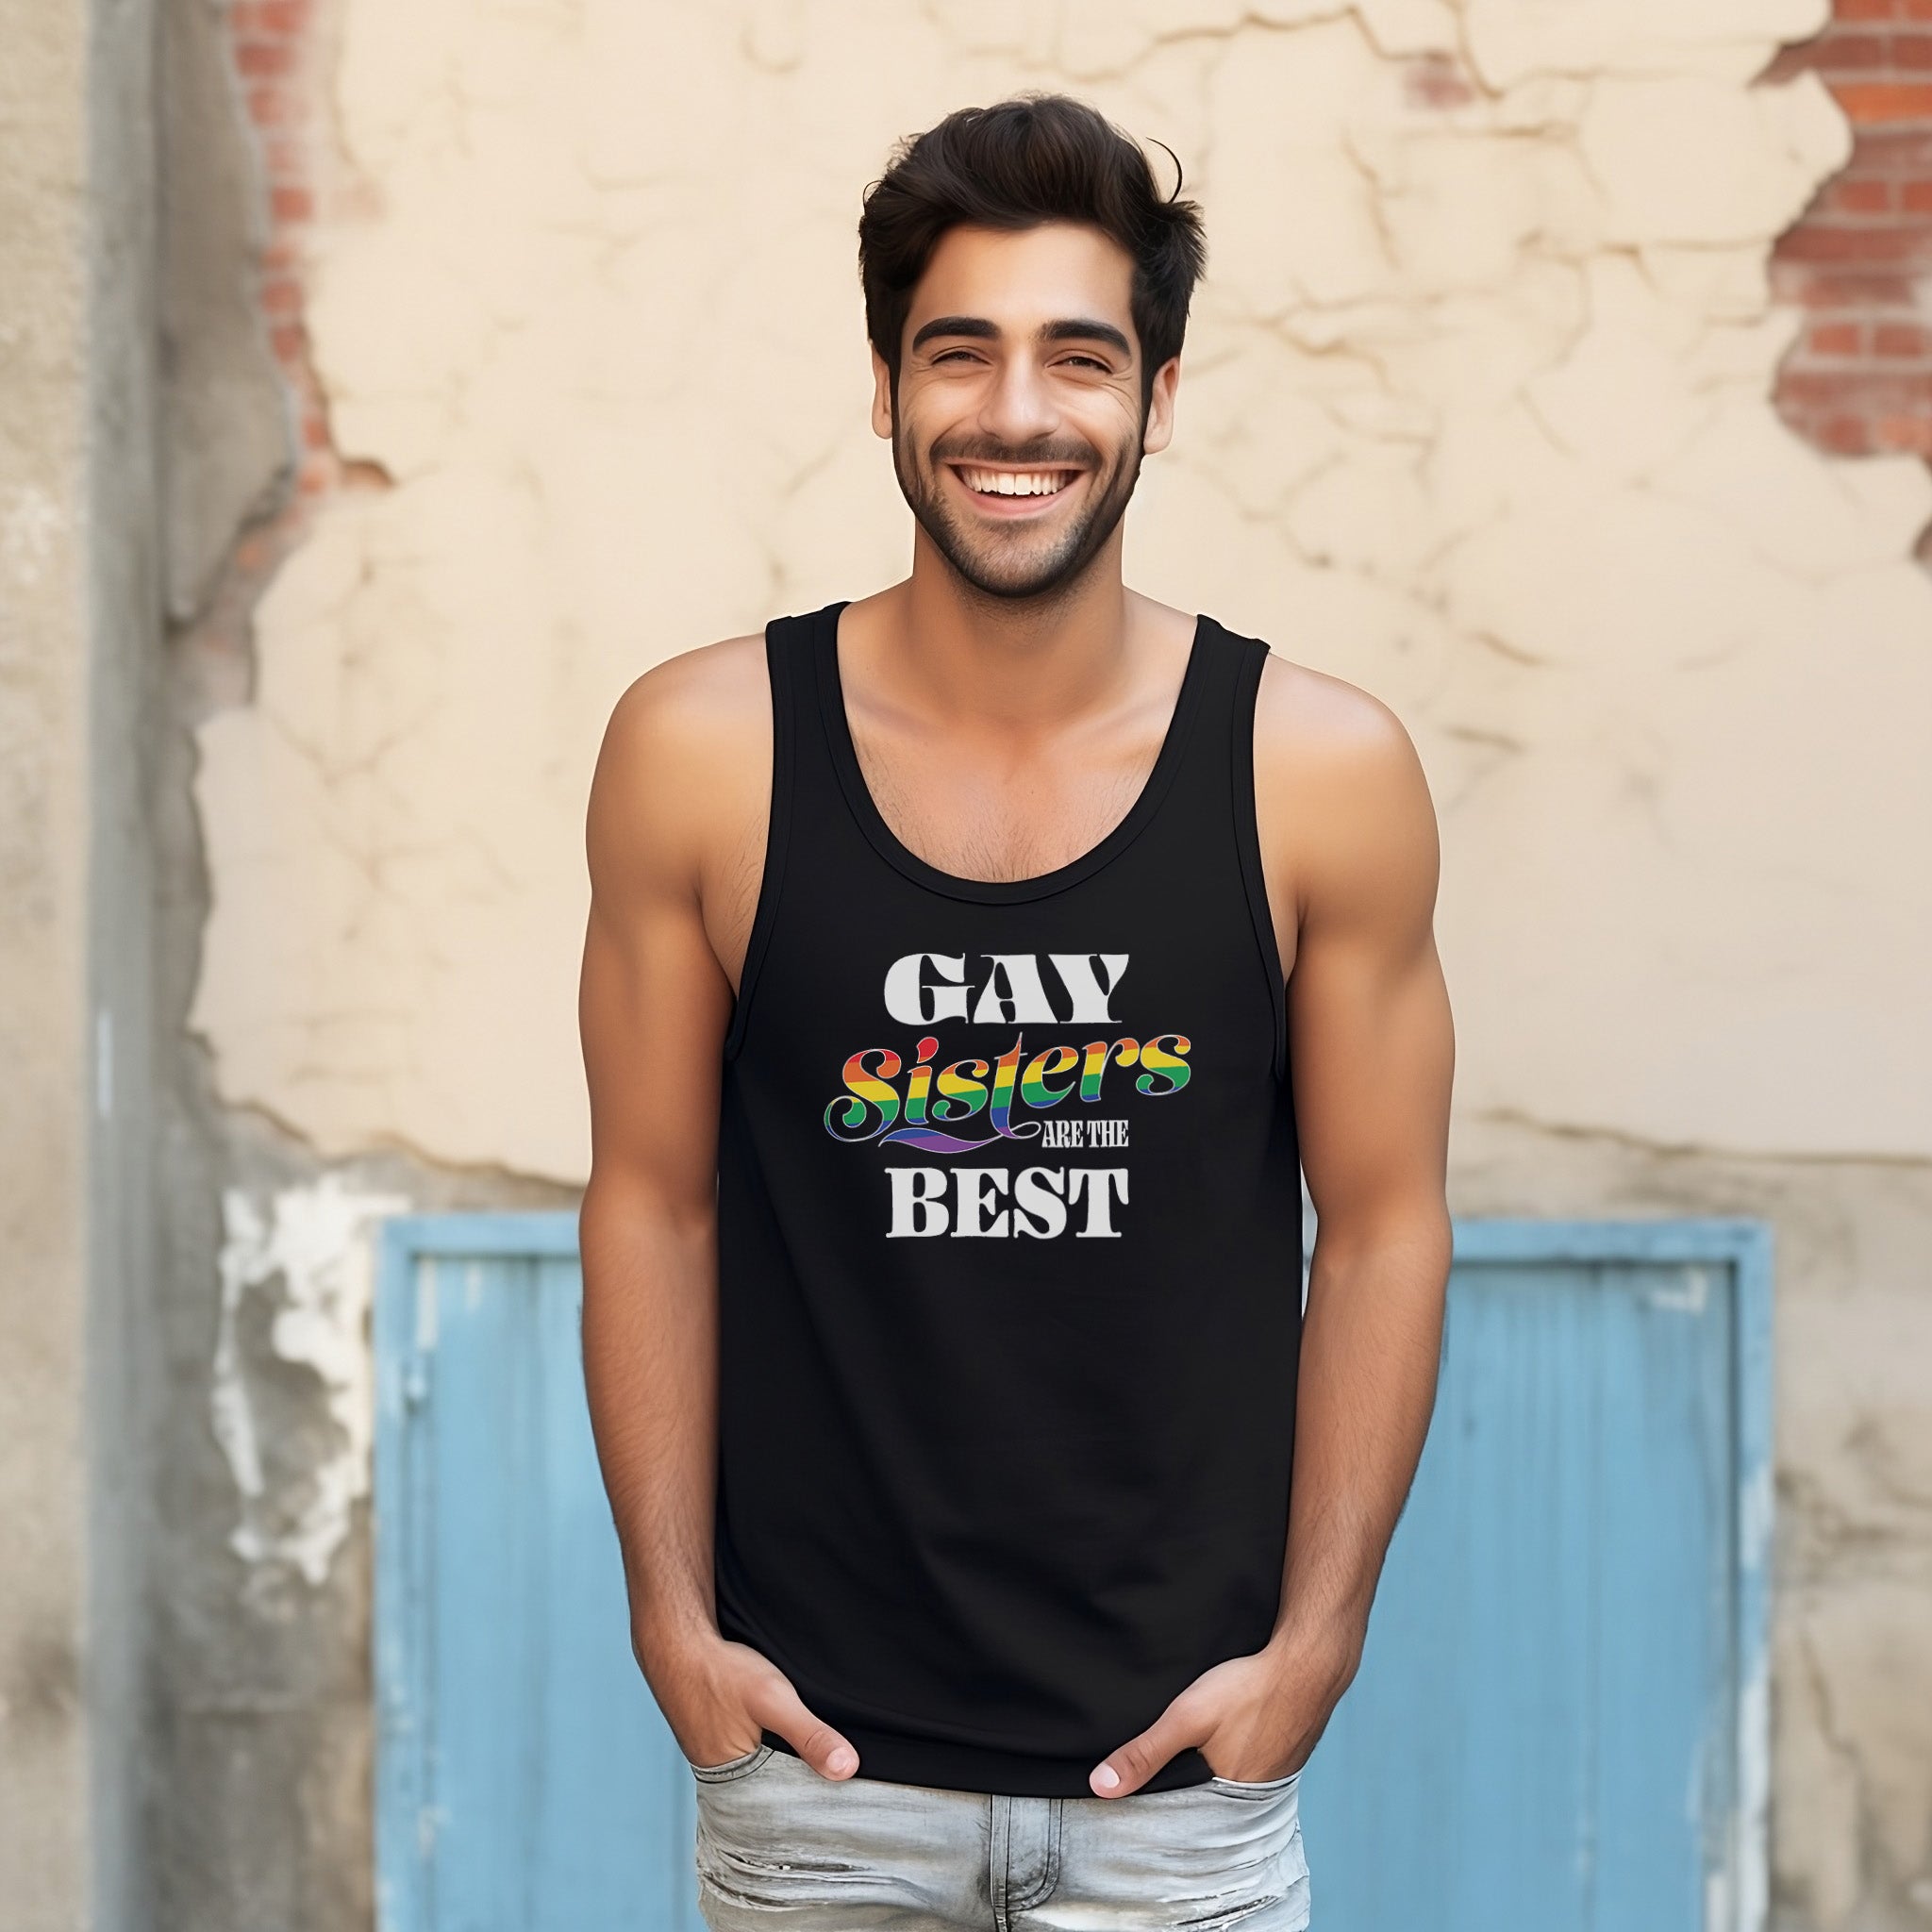 "Gay Sisters are the Best" - Celebration Tank Top - Hunky Tops